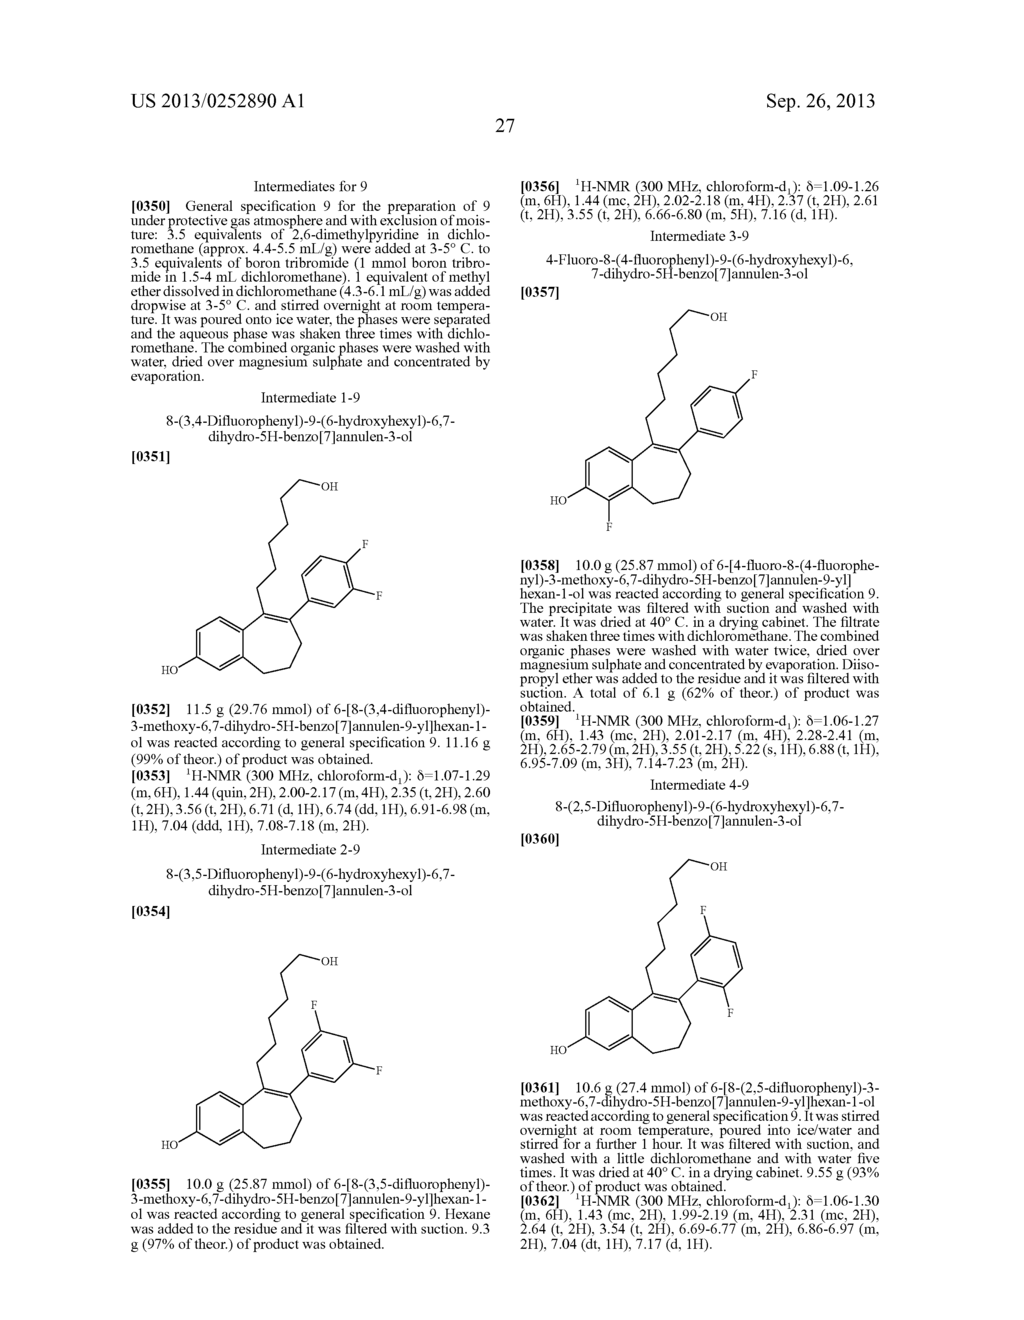 6,7-DIHYDRO-5H-BENZO[7]ANNULENE DERIVATIVES, PROCESS FOR PREPARATION     THEREOF, PHARMACEUTICAL PREPARATIONS COMPRISING THEM, AND THE USE THEREOF     FOR PRODUCTION OF MEDICAMENTS - diagram, schematic, and image 35